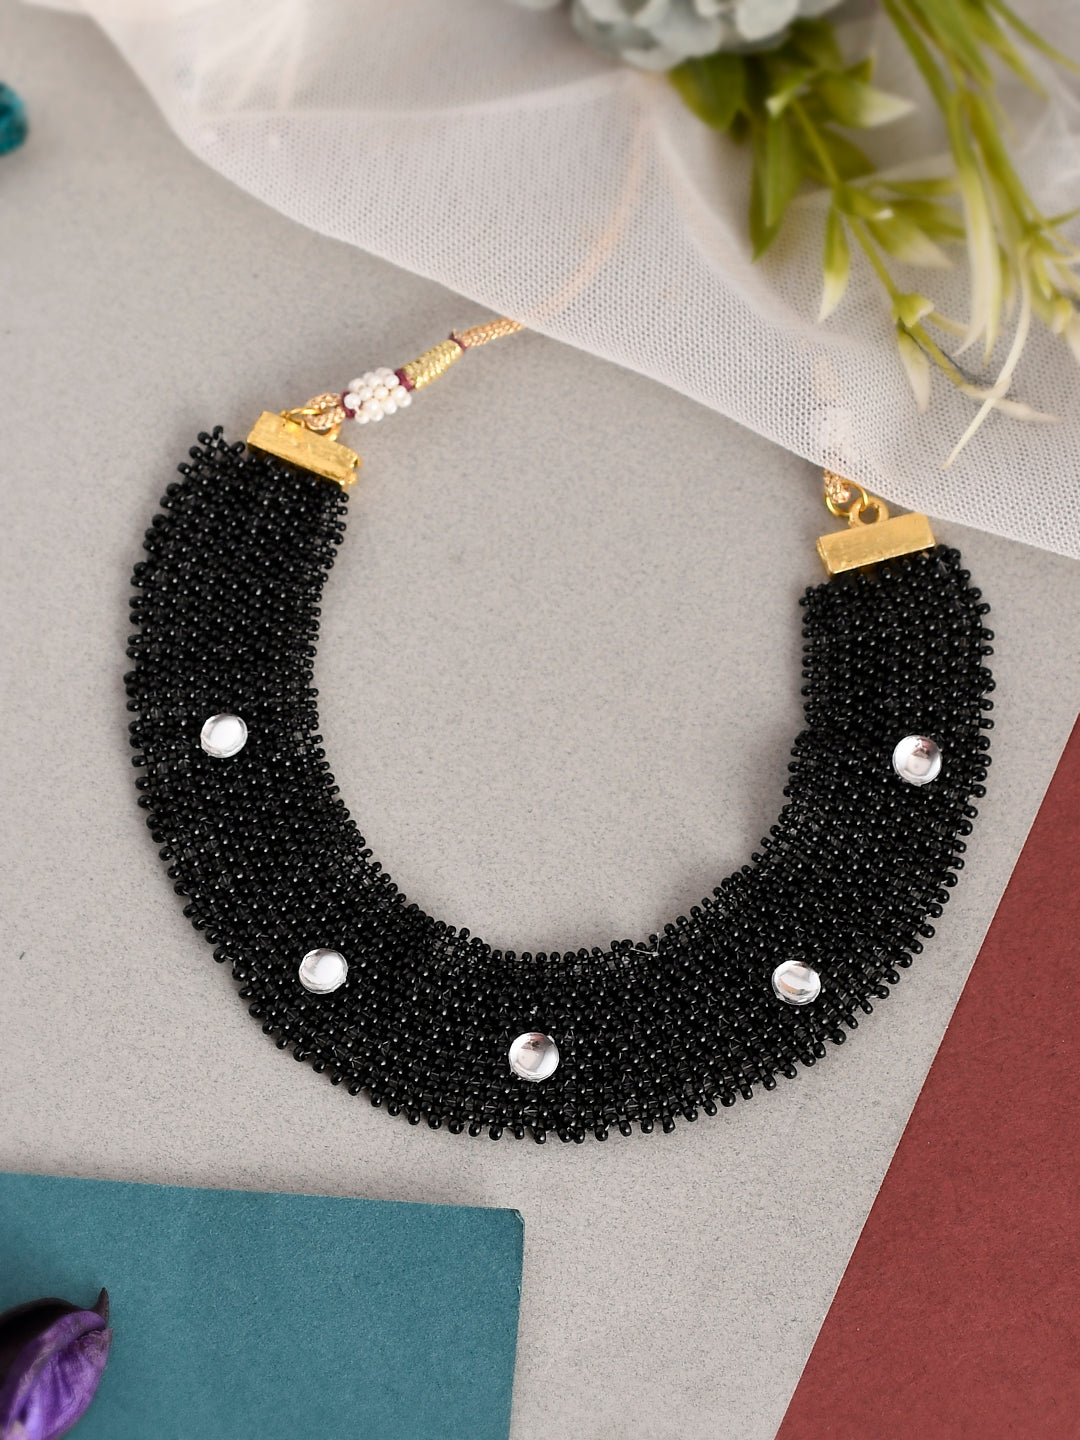 Gold Plated Black Beads Choker Necklace